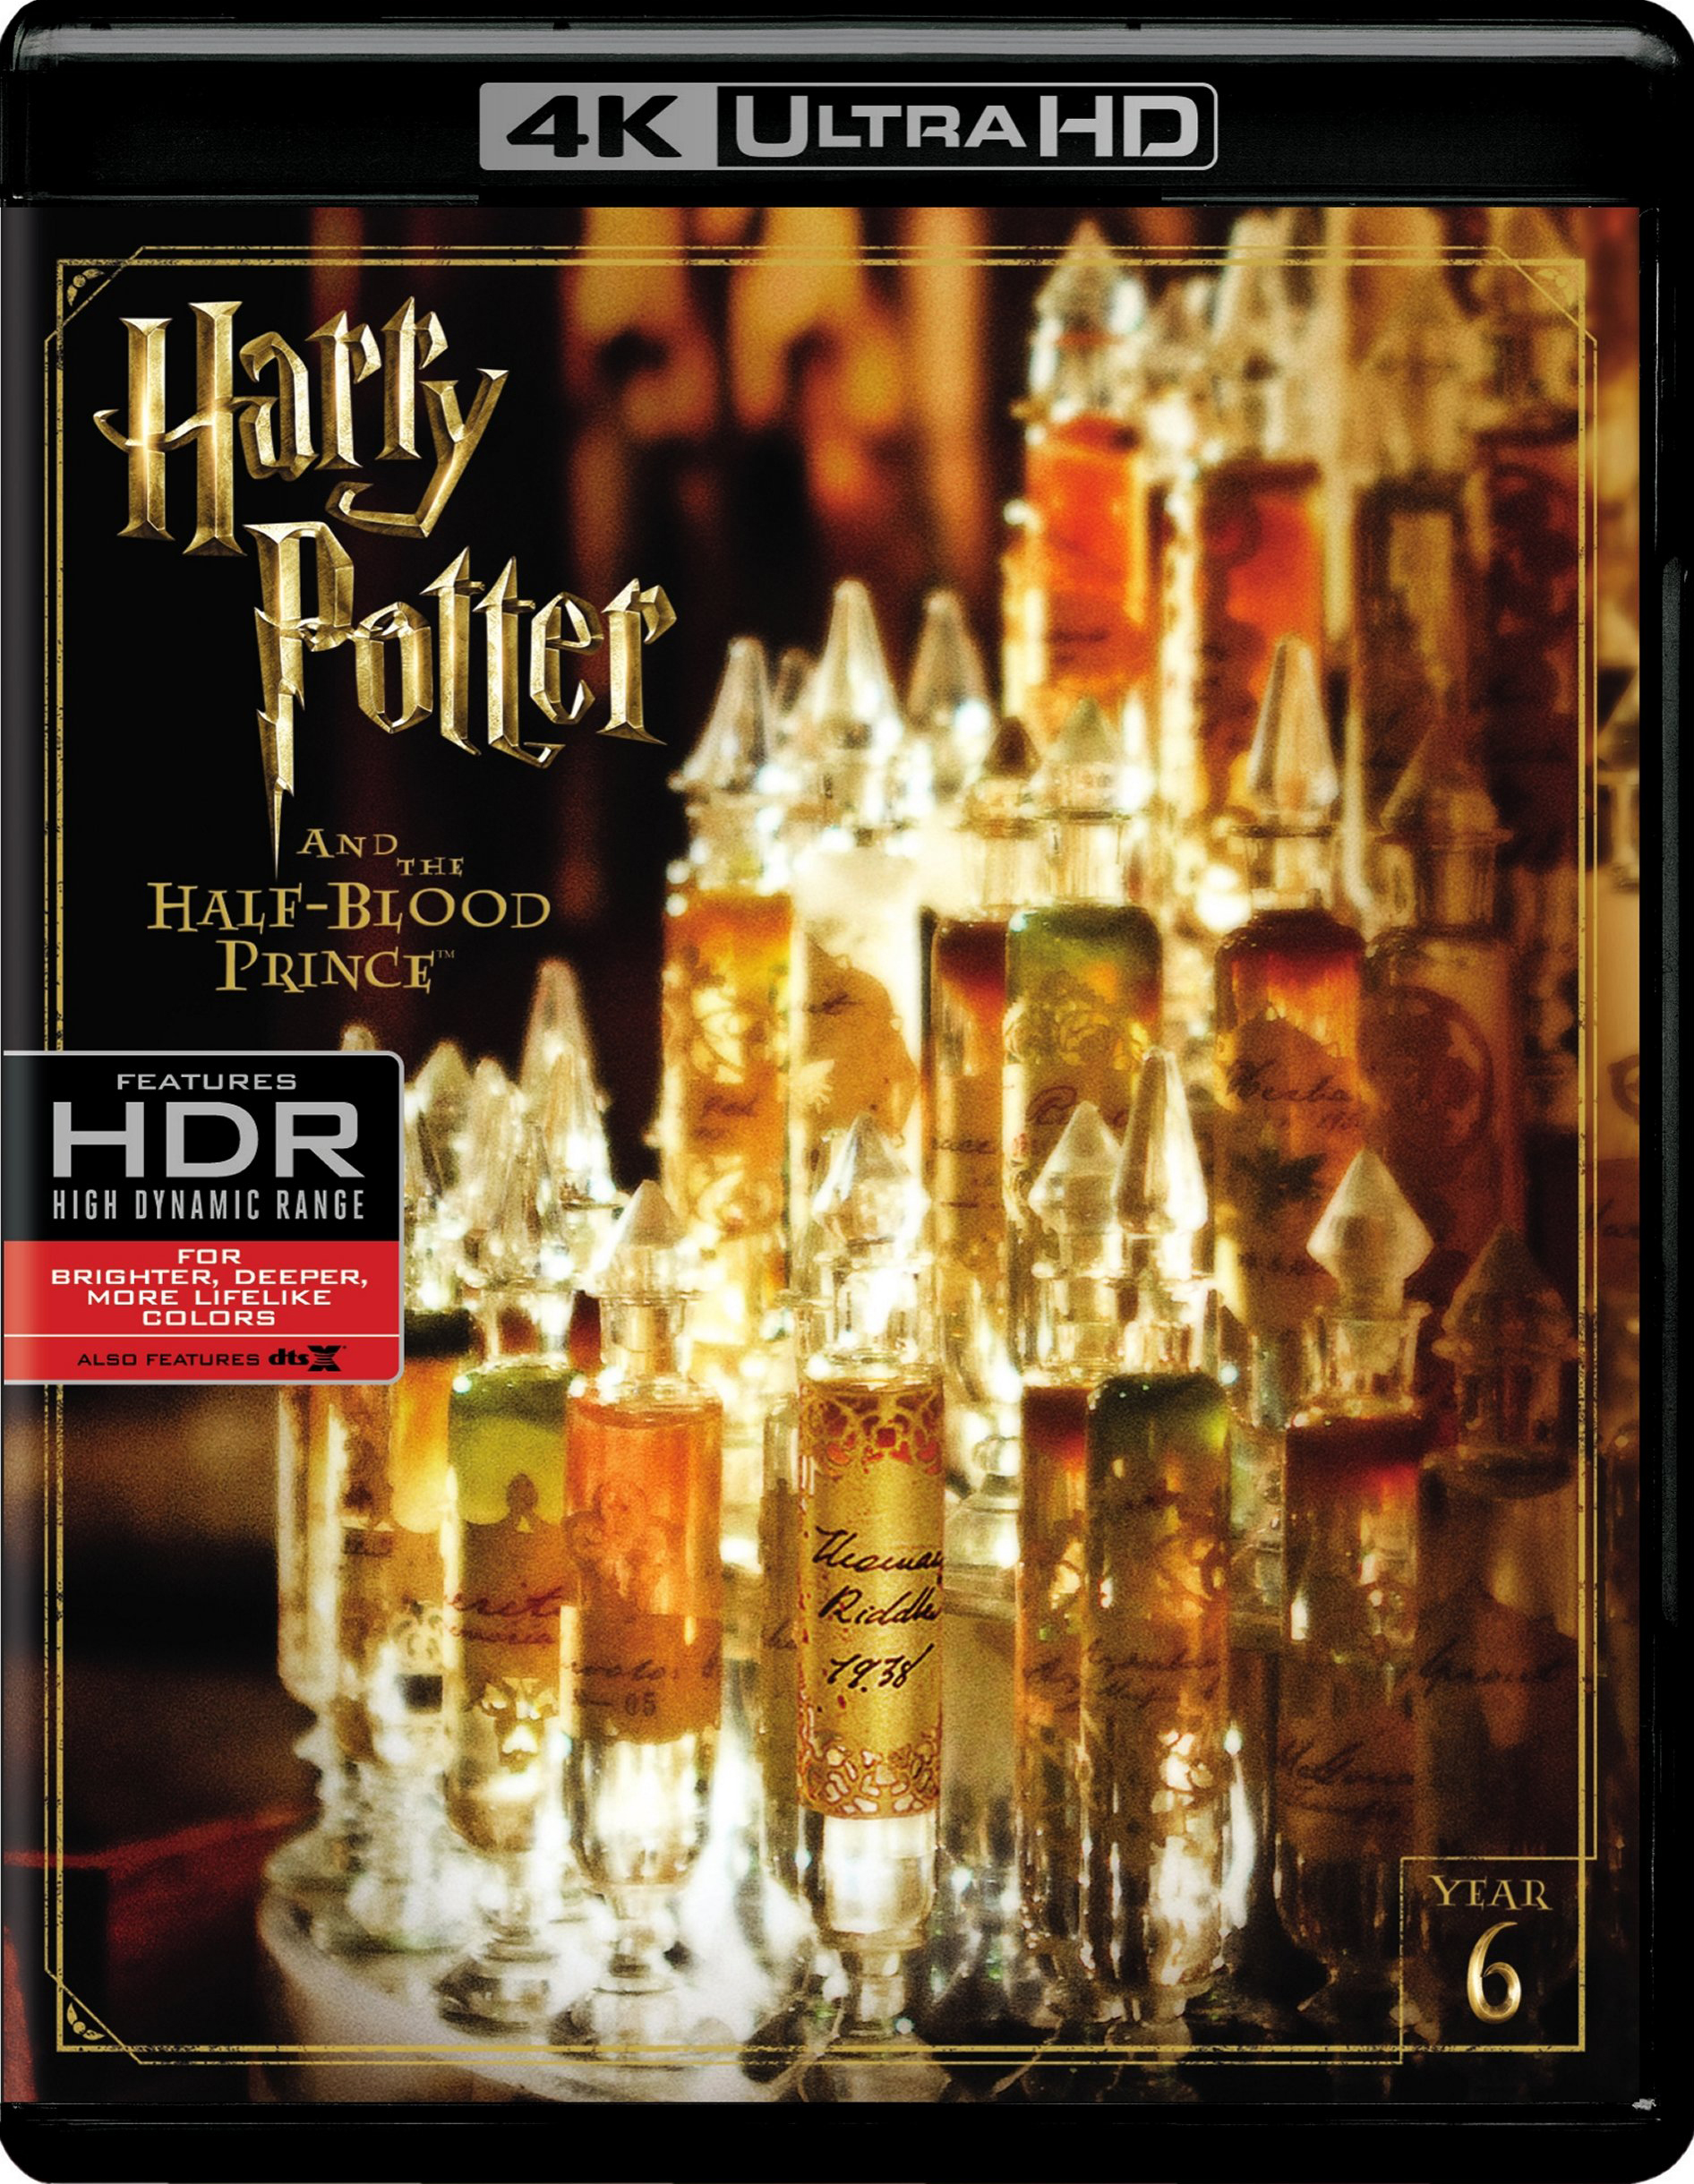 Harry Potter and the Half-Blood Prince [4K Ultra HD Blu-ray/Blu-ray] [2009]  Best Buy